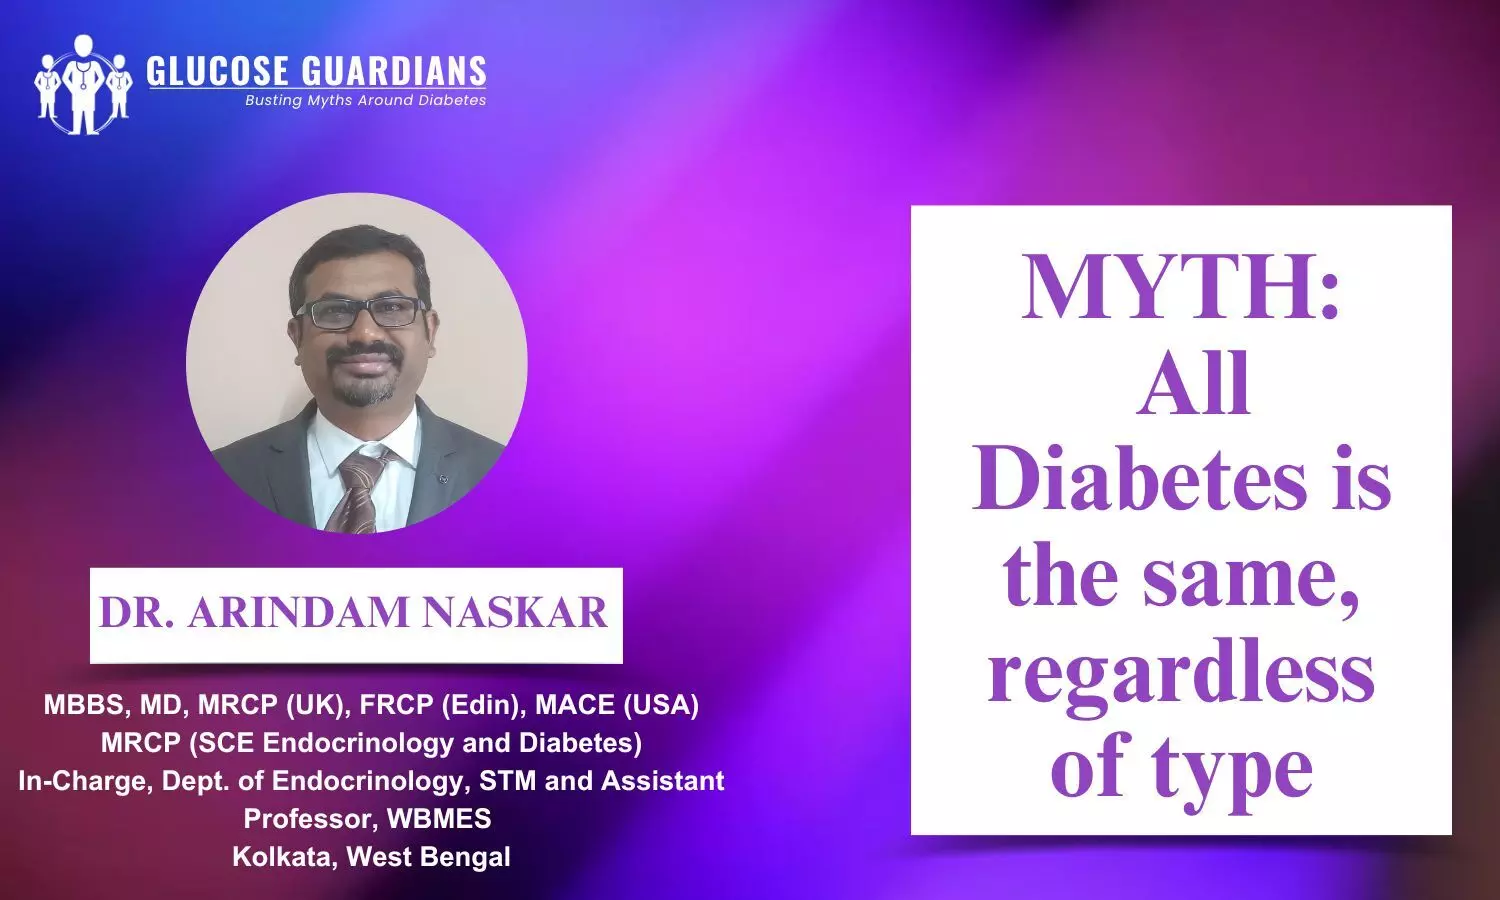 Why should we be concerned about diabetes, is it same regardless of the type? - Dr Arindam Naskar